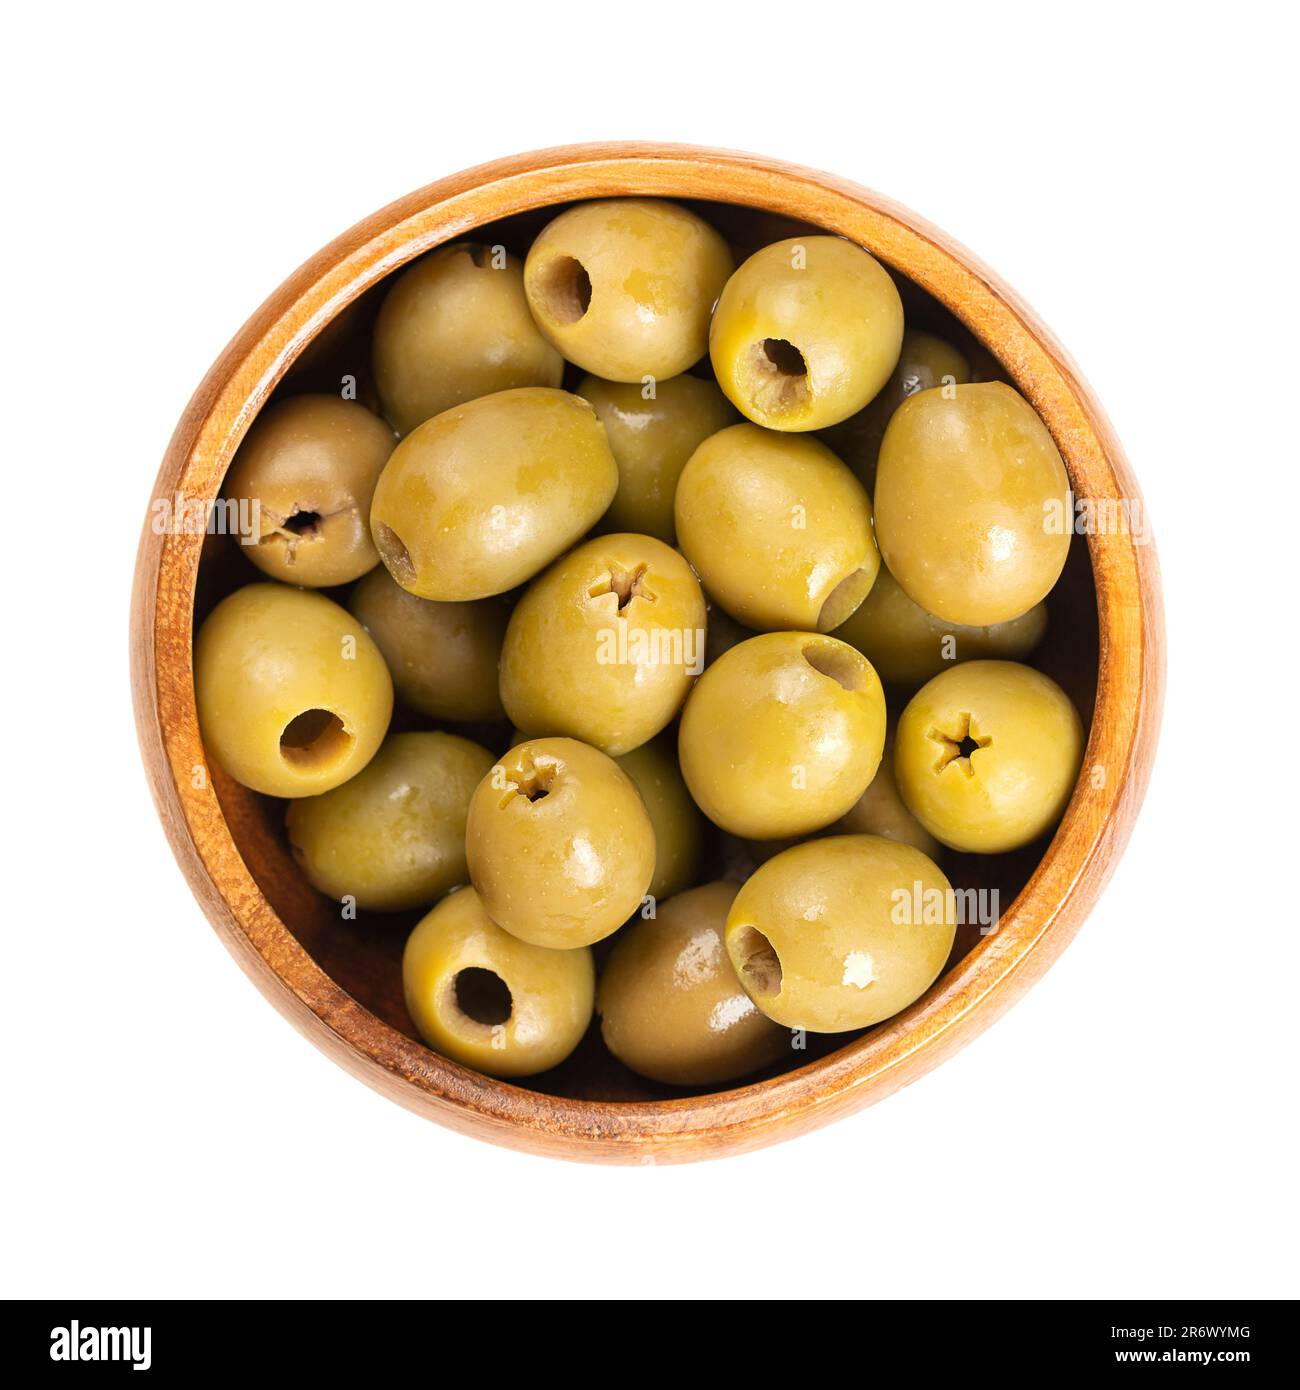 Pitted green olives, in a wooden bowl. Organic olives from Italy. Picked as semi-ripe and turning-color olives, with reddish-green color. Stock Photo